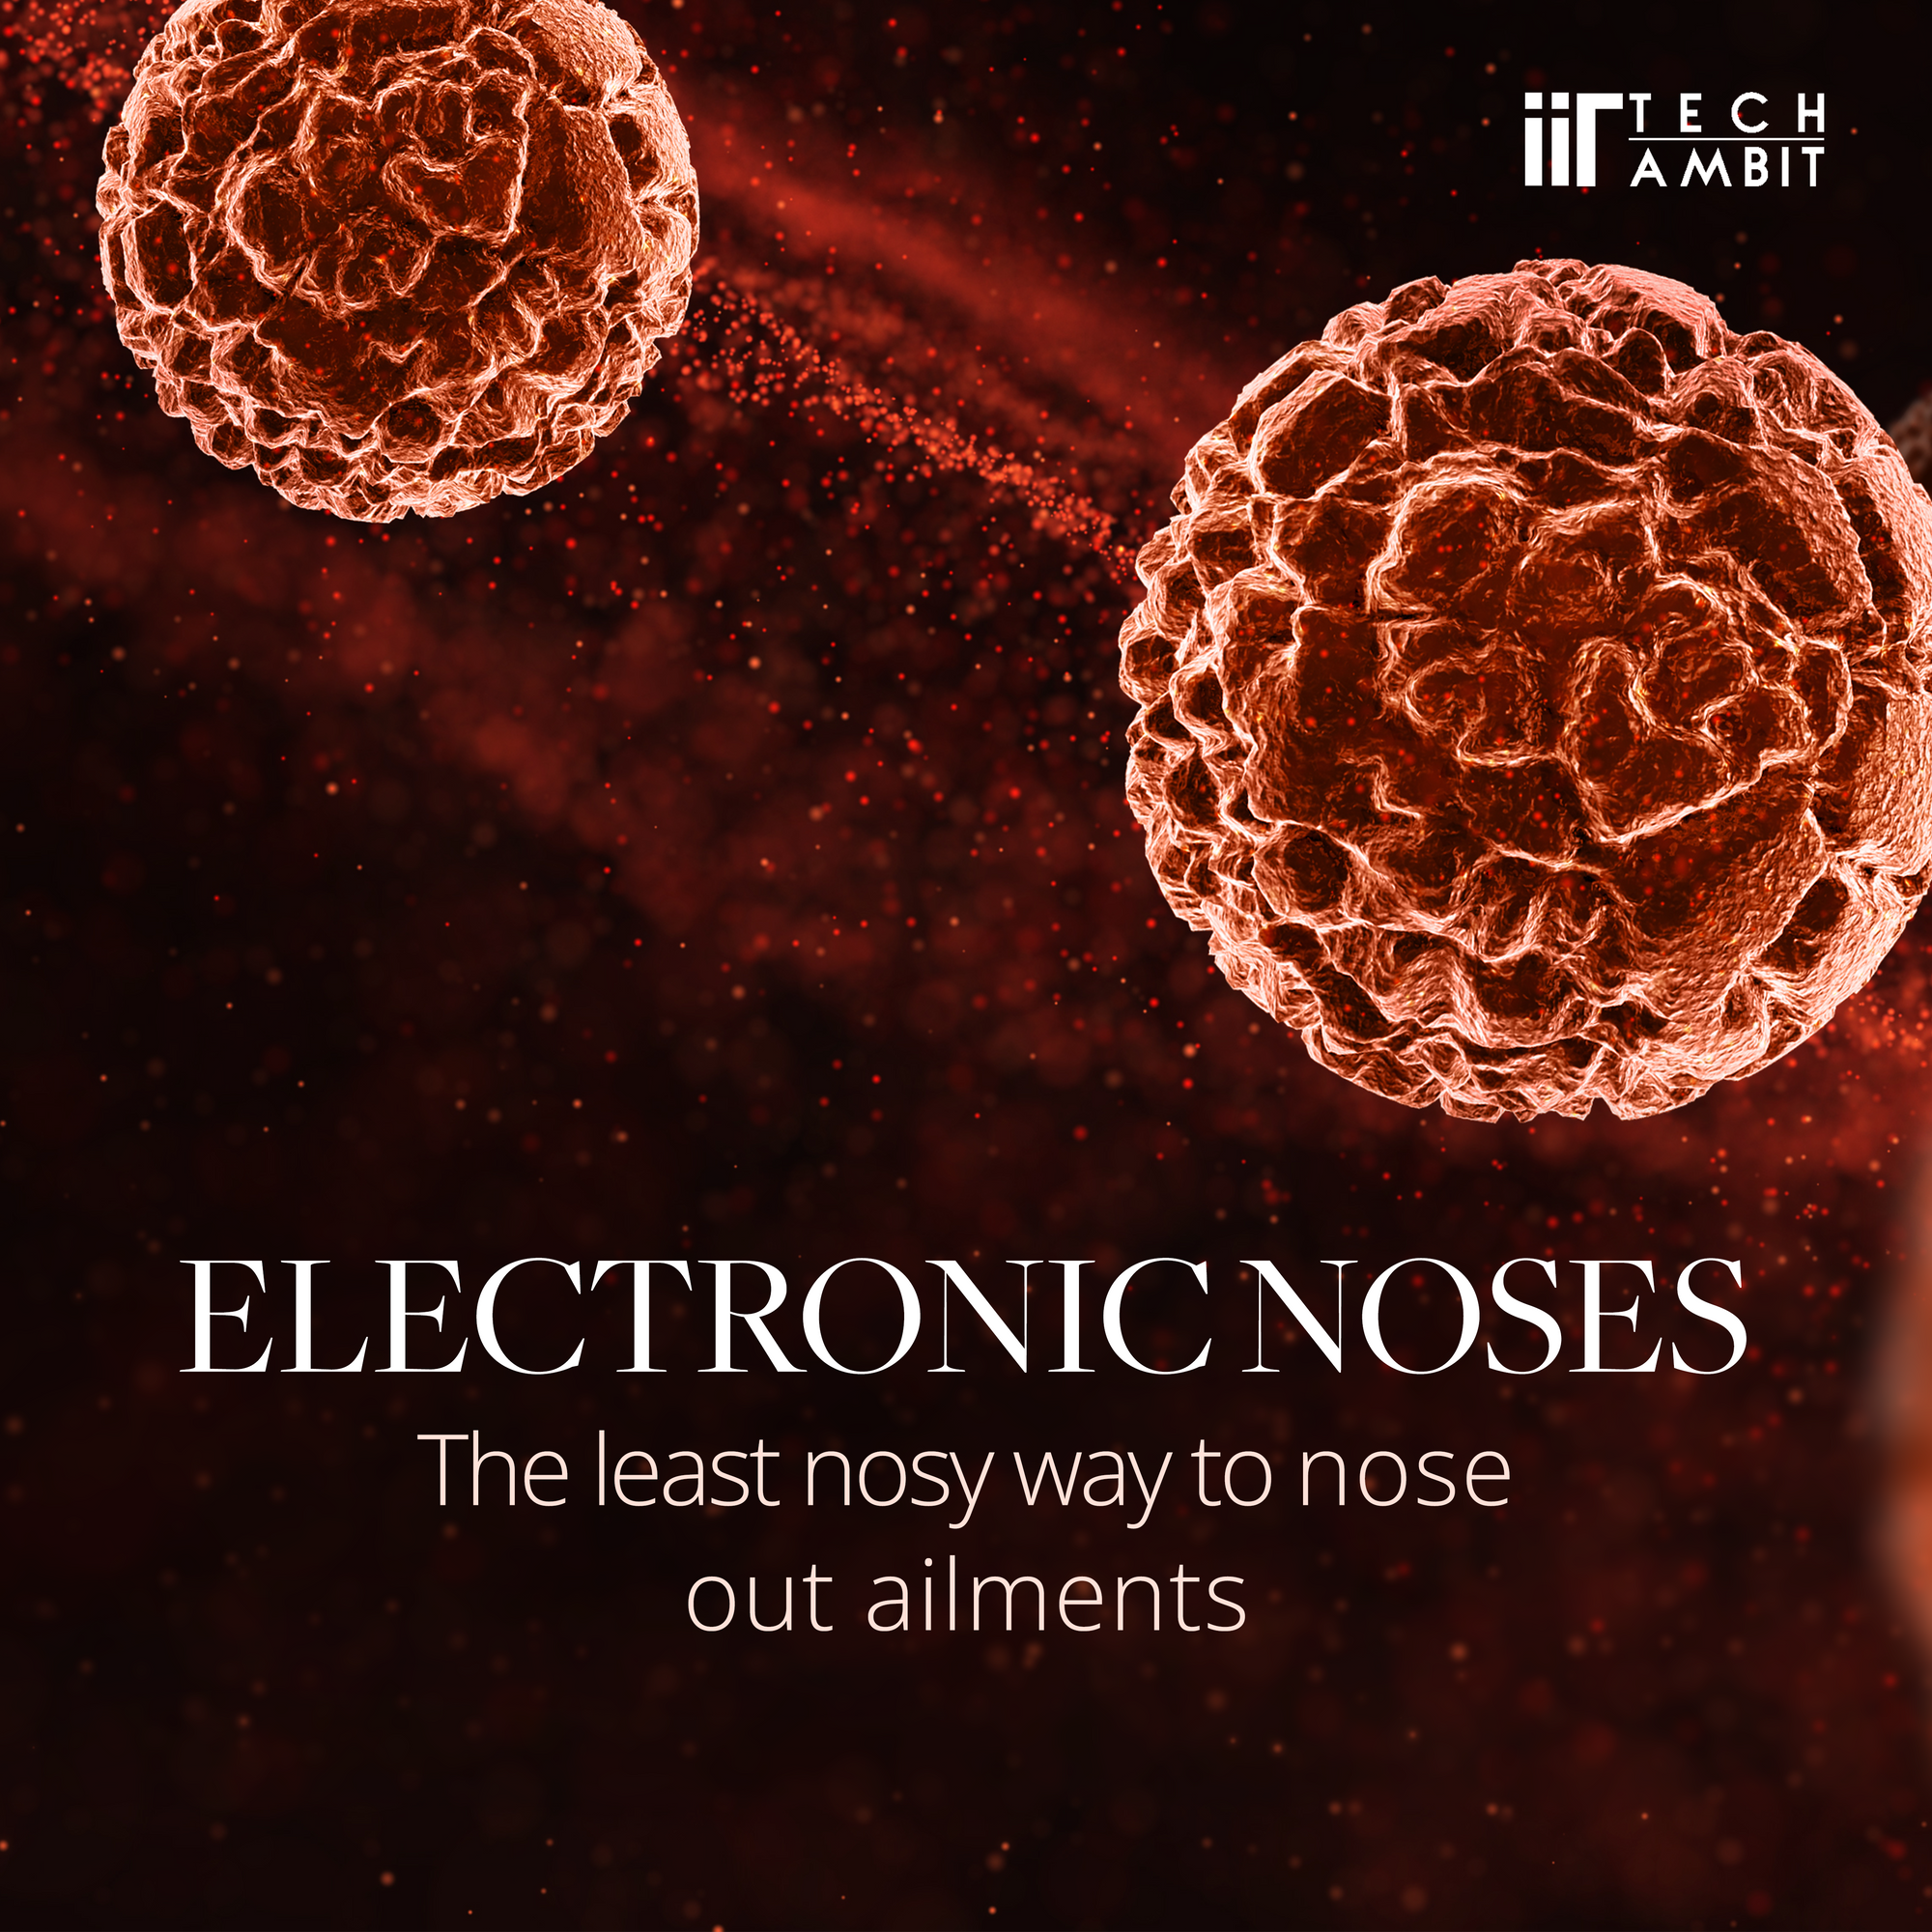 Electronic noses: the least nosy way to nose out ailments?